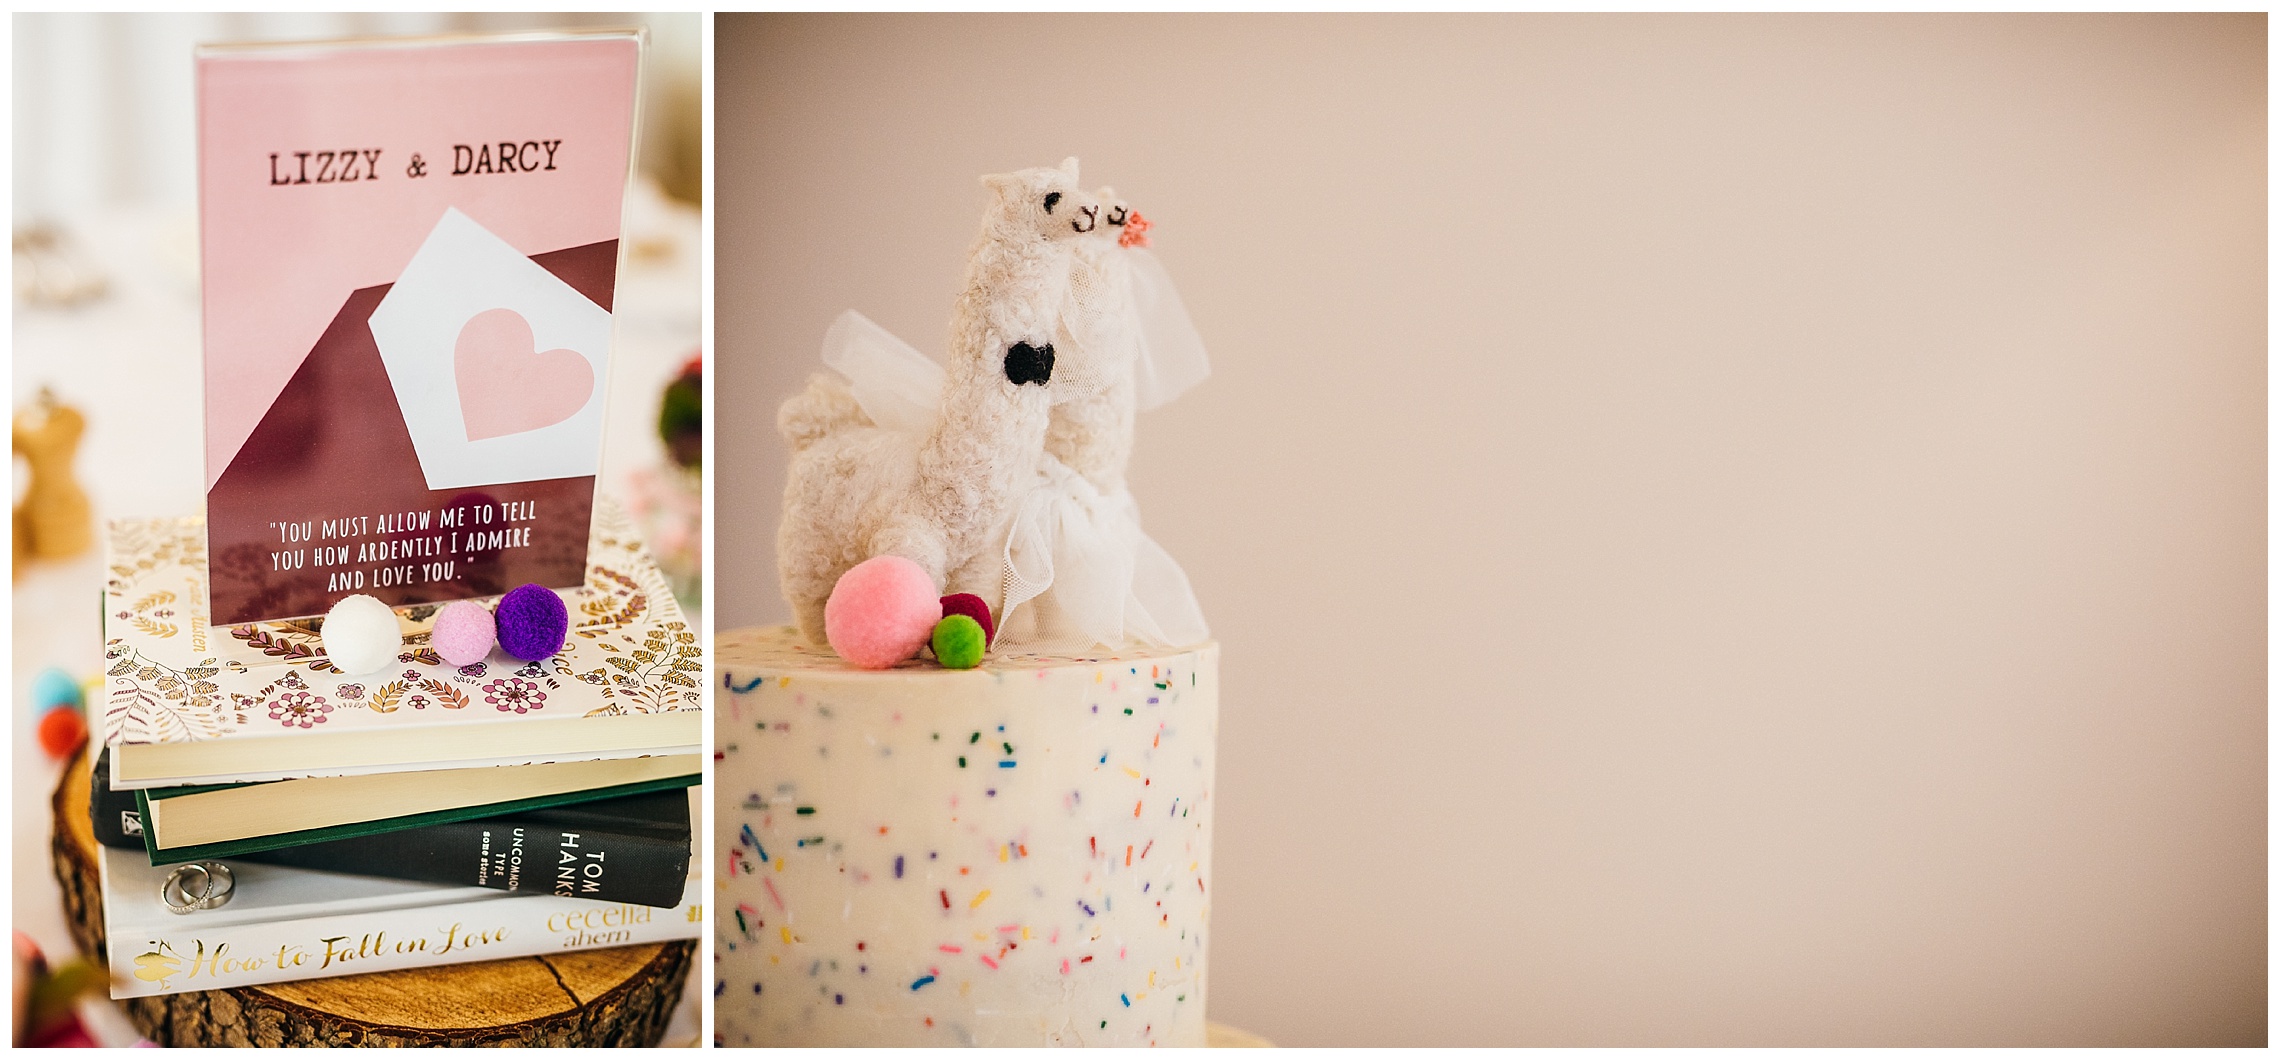 colourful wedding cake and film quote centrepieces